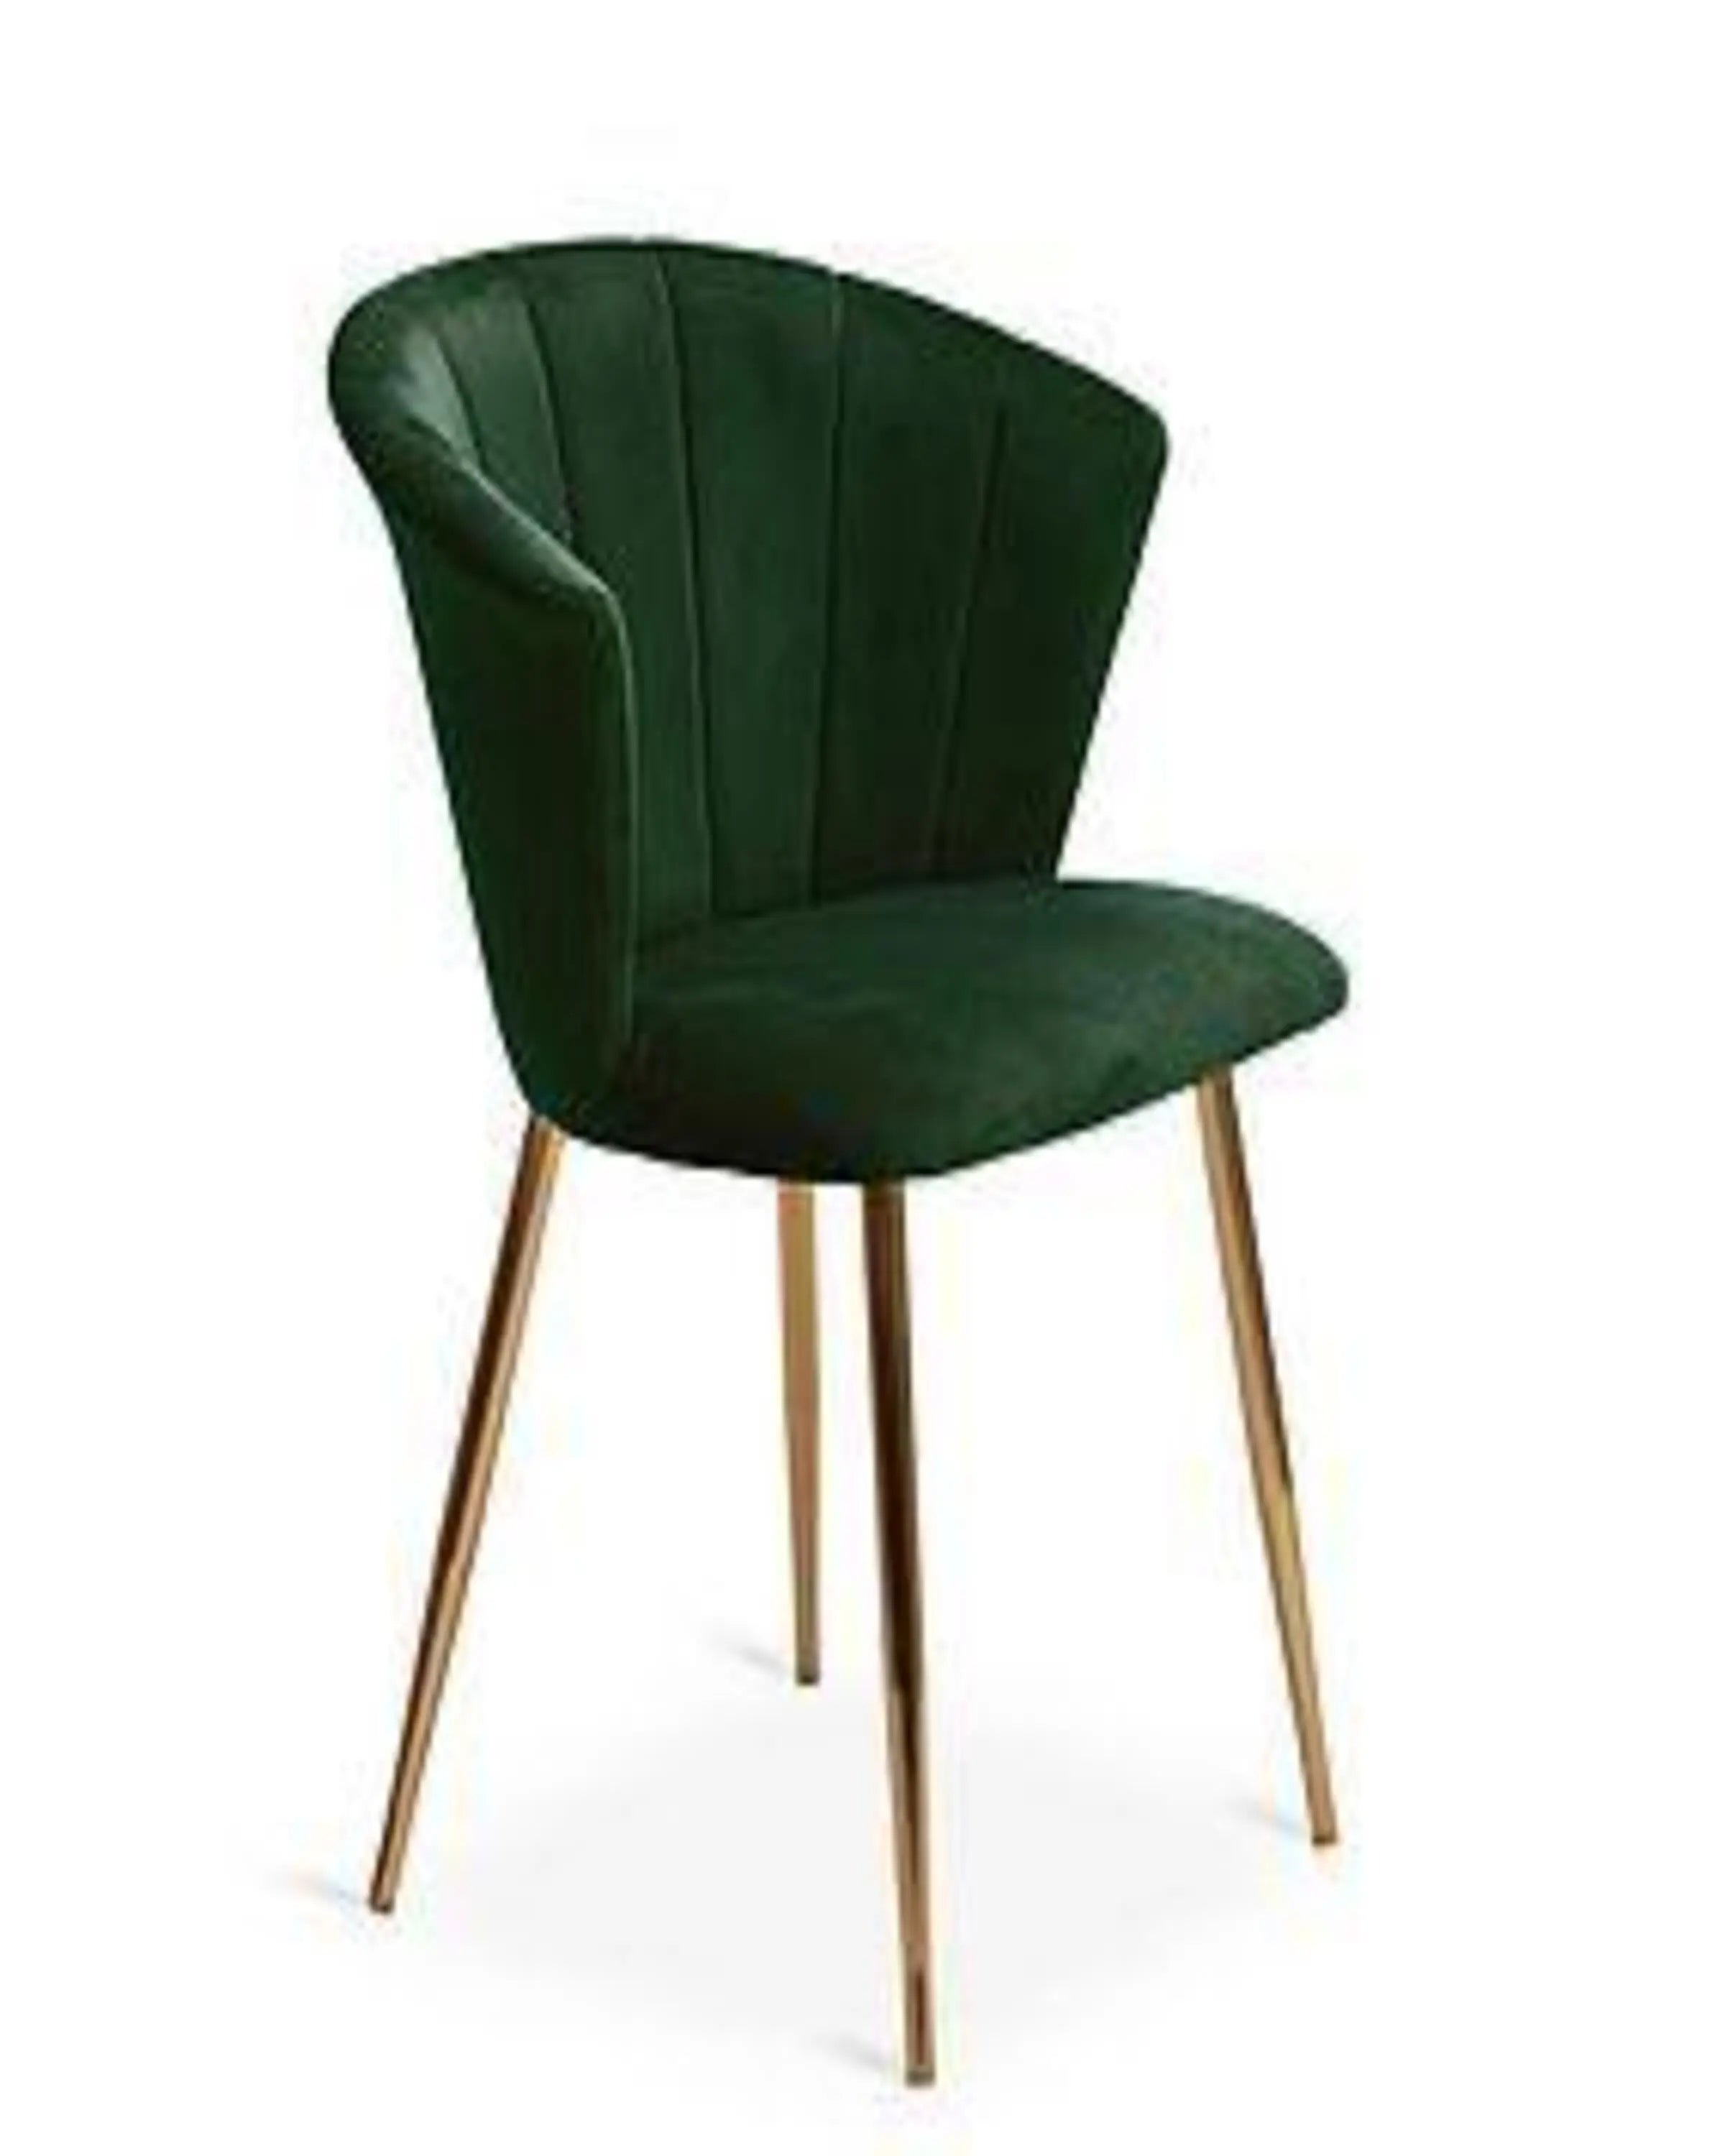 Mana Green Dining Chairs ANGIE HOMES